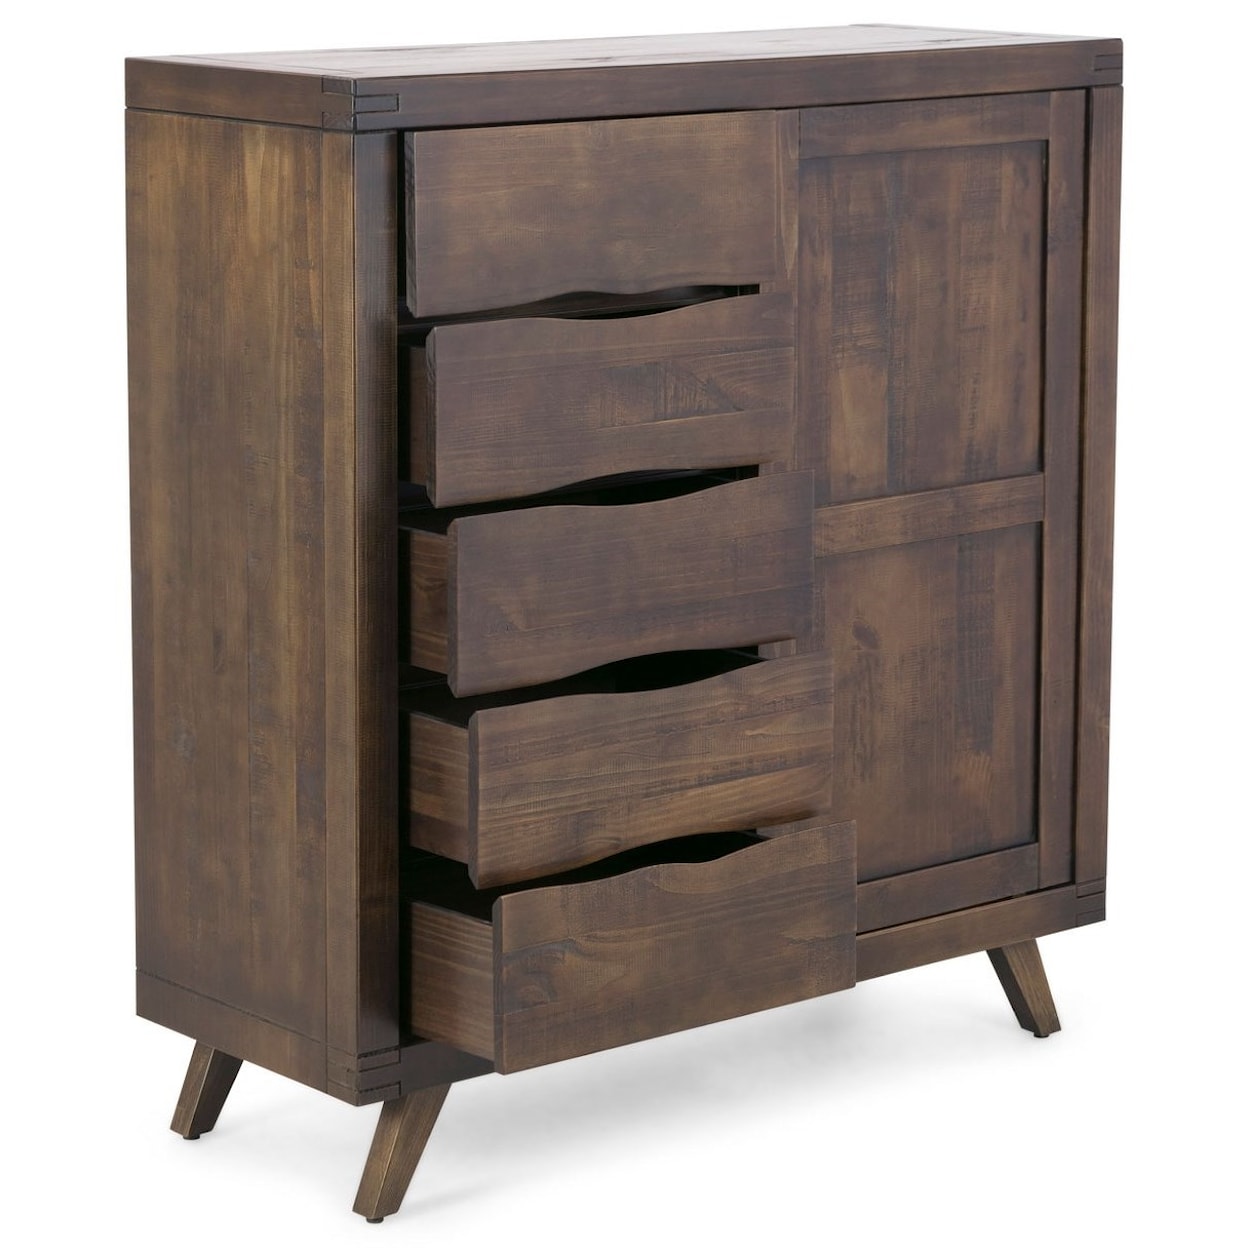 Steve Silver Pacific Pacific Gentleman's Chest